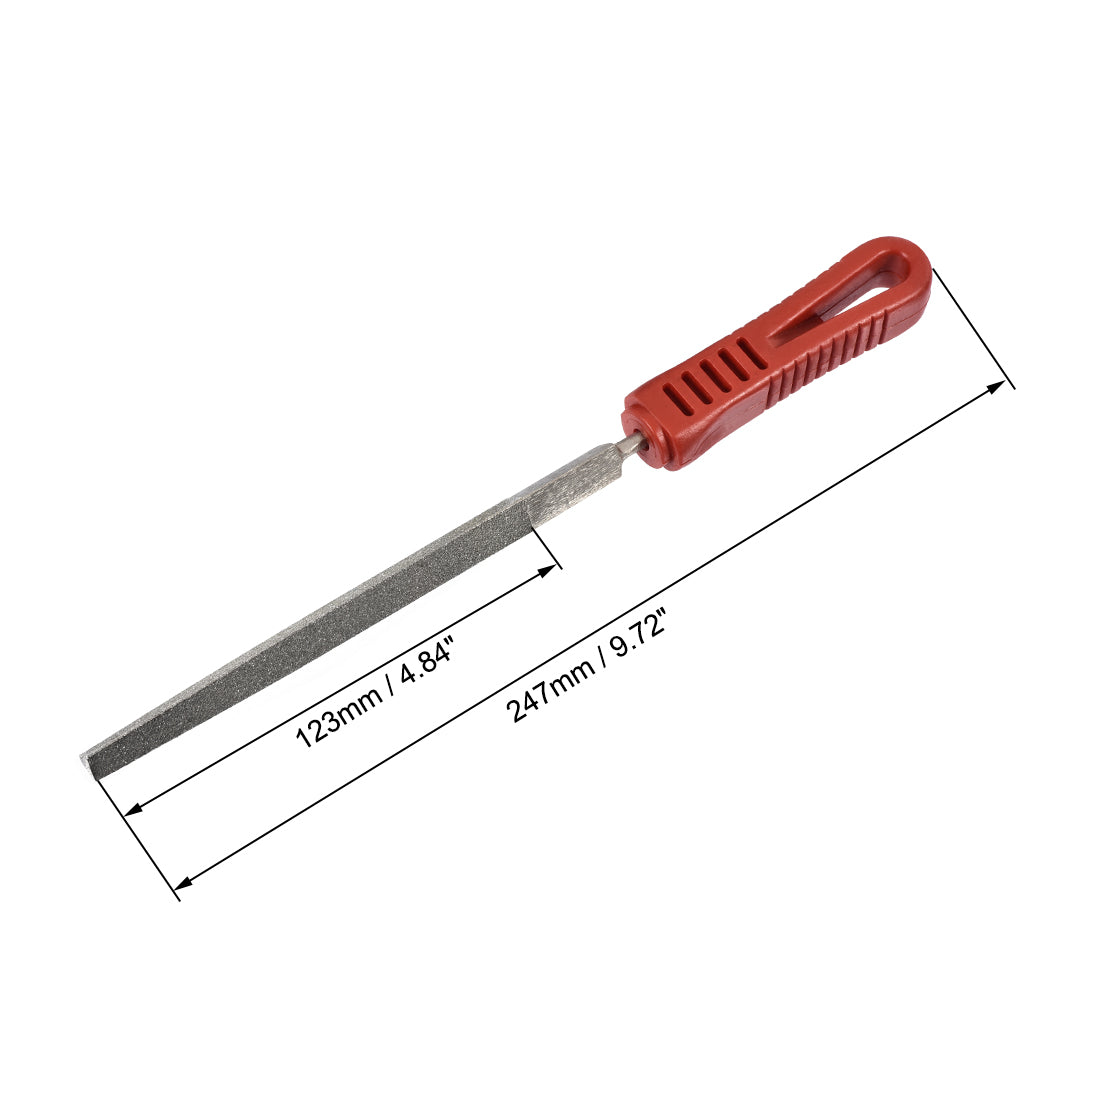 Uxcell Uxcell Diamond File 6 Inch Flat File Diamond Coated Plastic Handle Hand Tool for Grinding Polishing